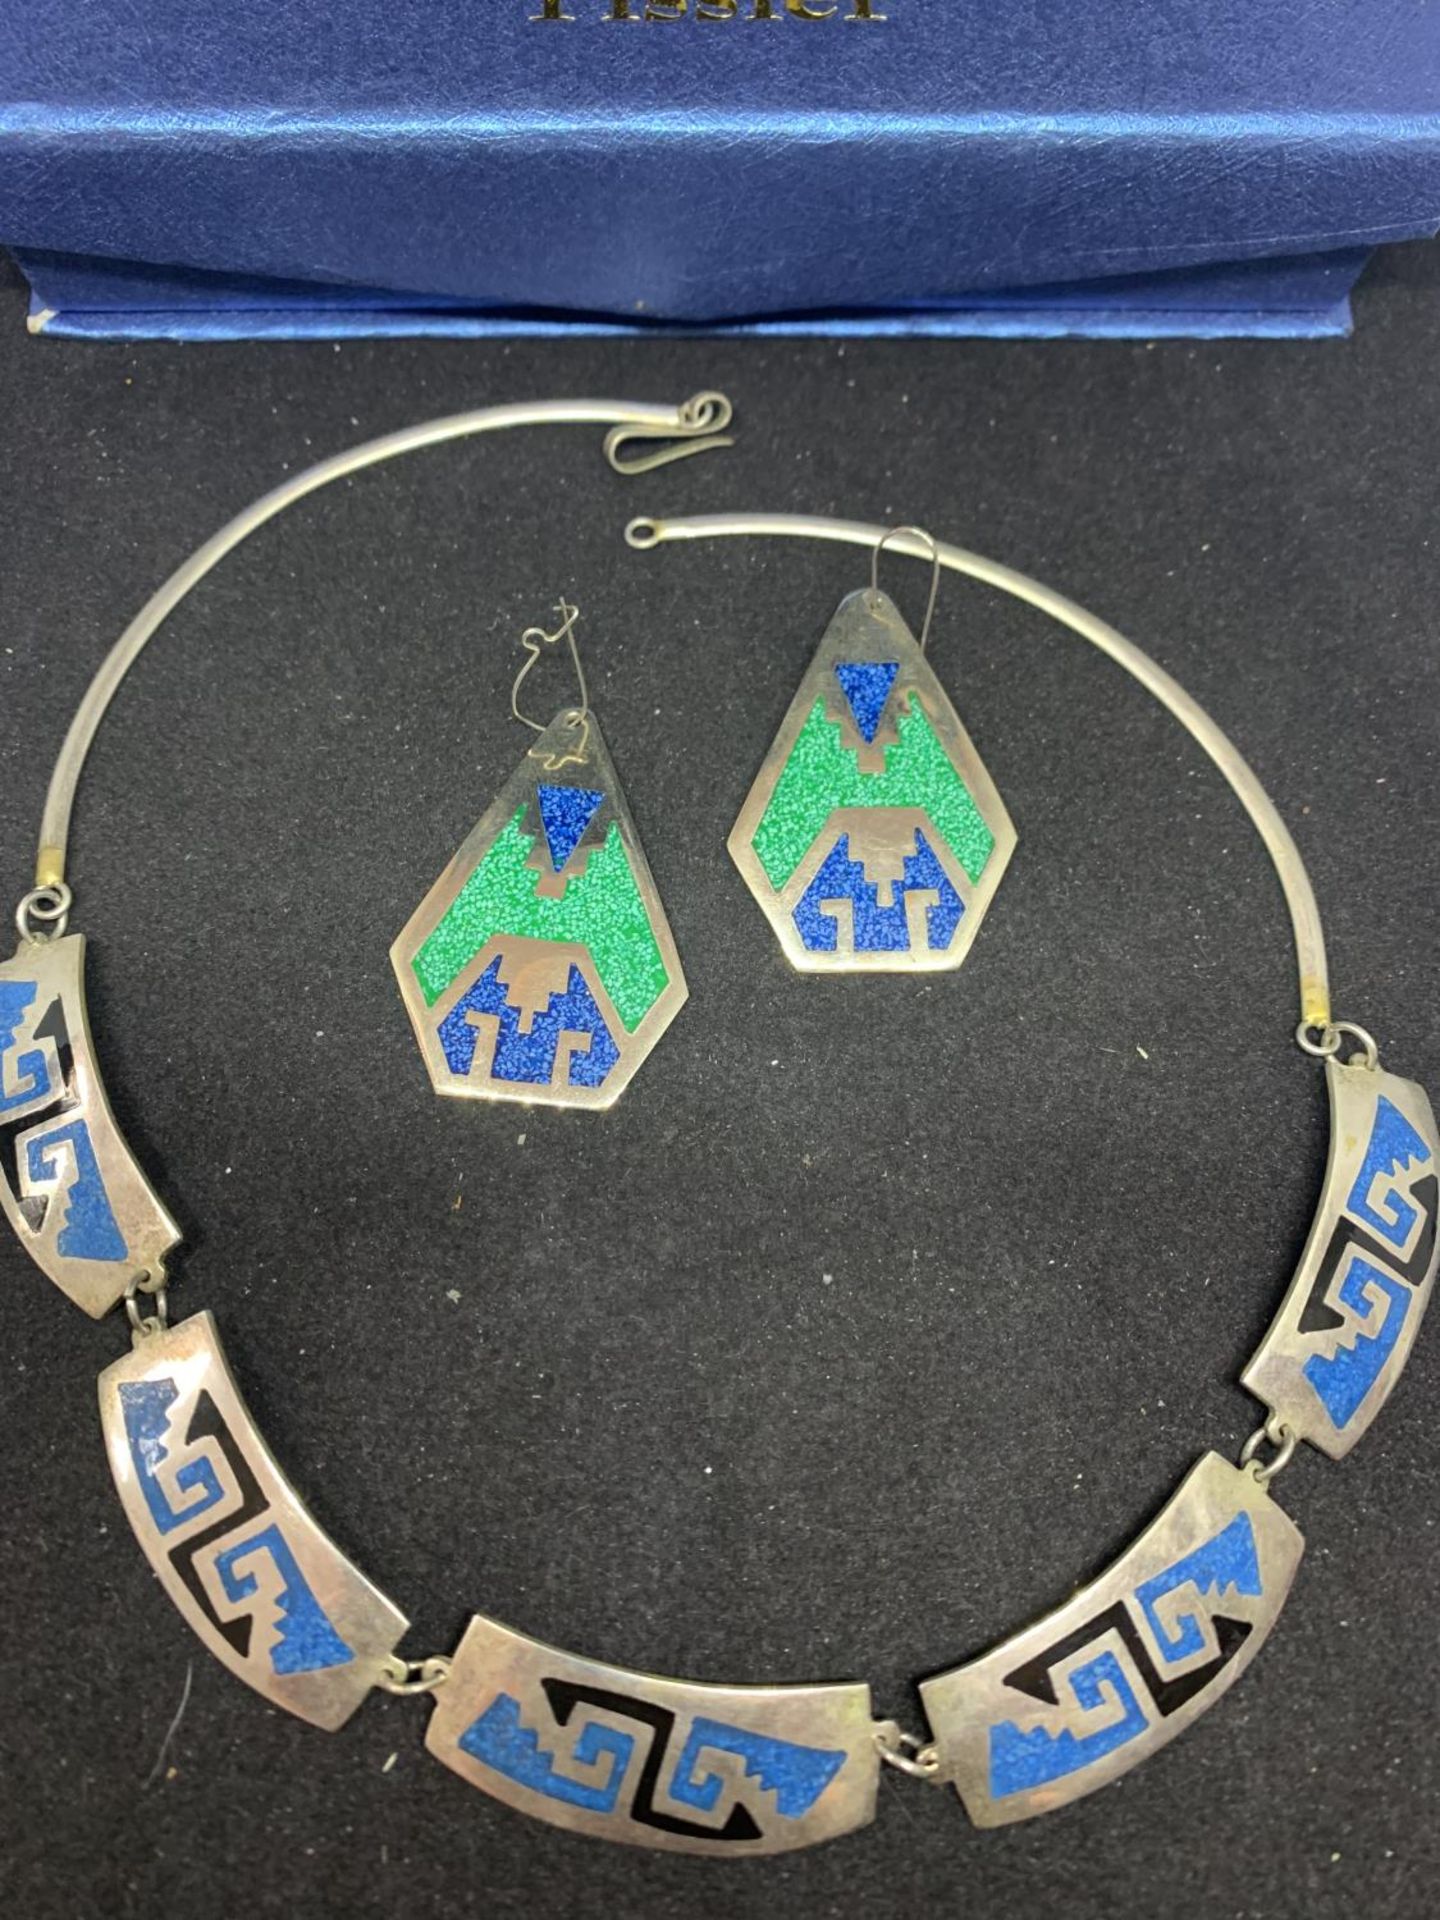 A SILVER NECKLACE AND EARRINGS SET IN AN AZTEC STYLE DESIGN WITH A PRESENTATION BOX